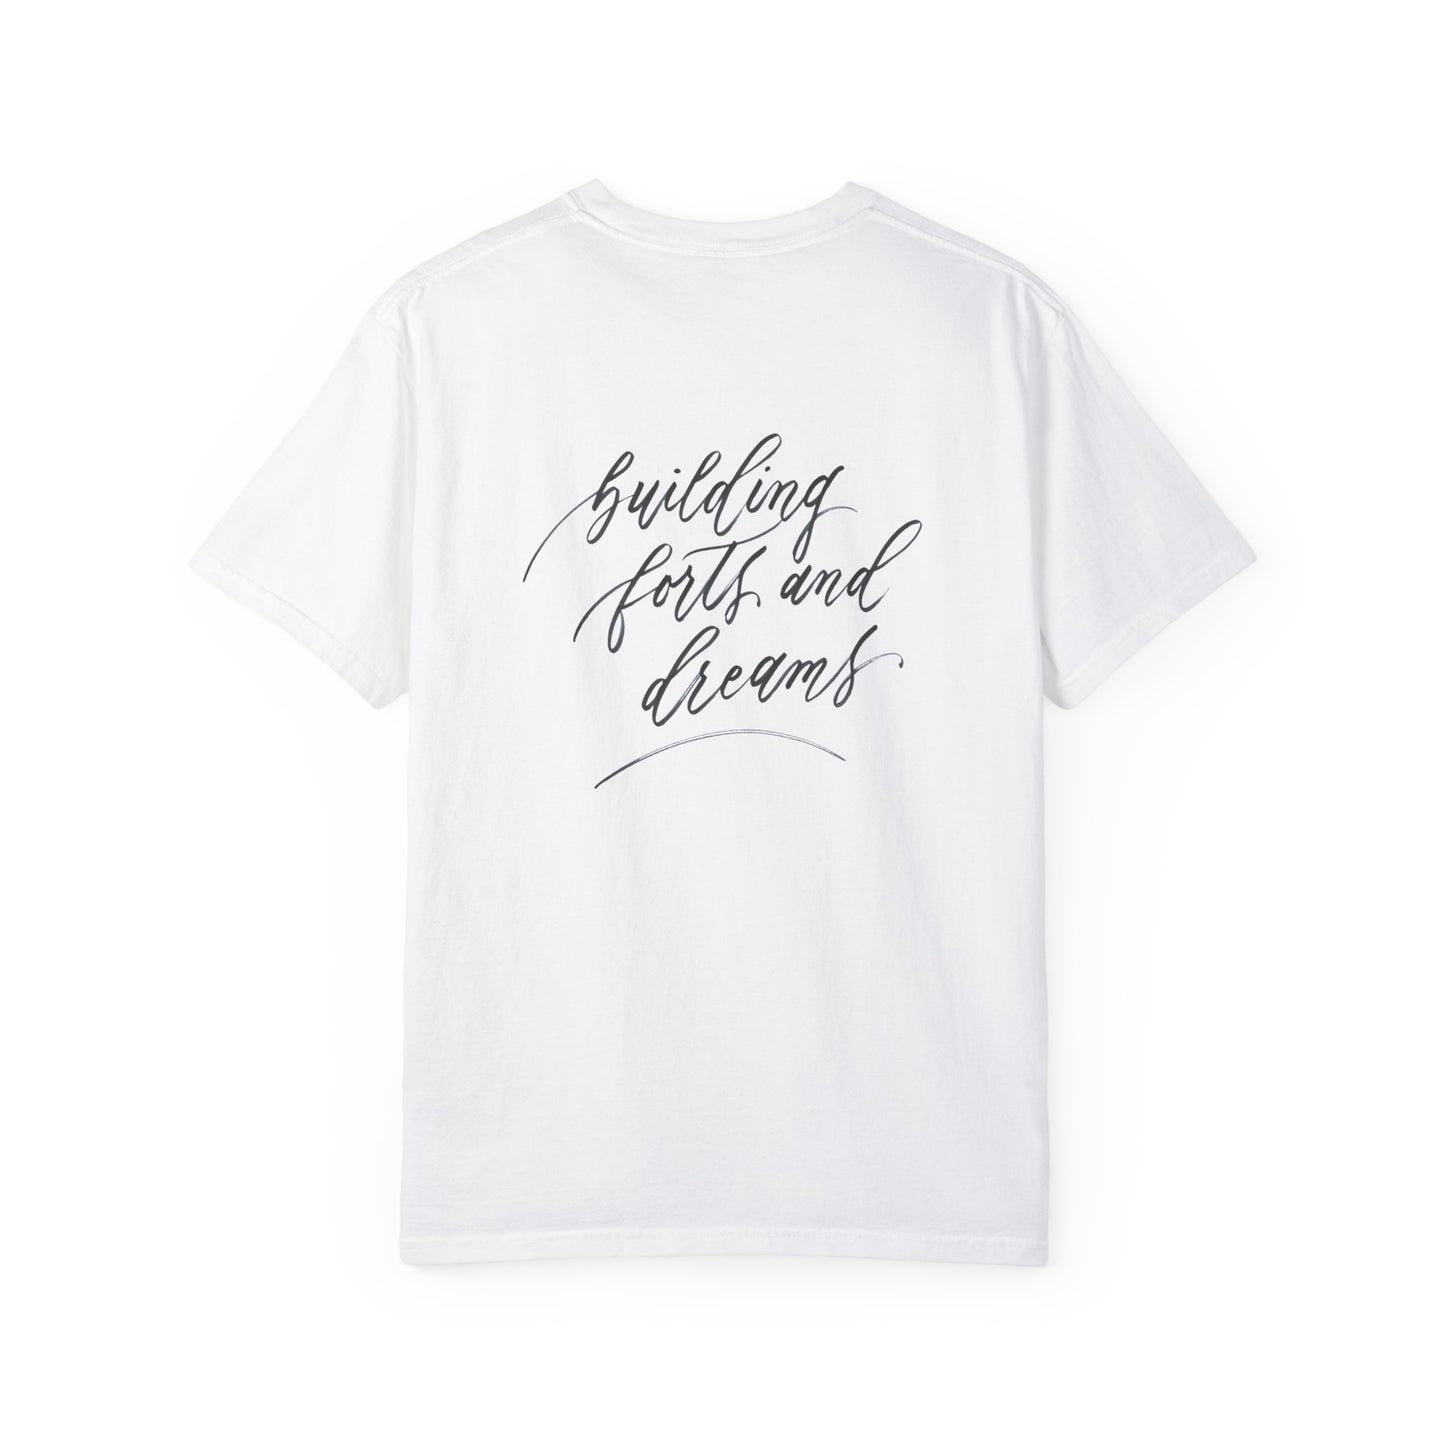 Script "Mama" Front & "Building Forts & Dreams" Calligraphy Back - Unisex High Quality 100% Cotton T-shirt - Mom & Dad Shirts #03